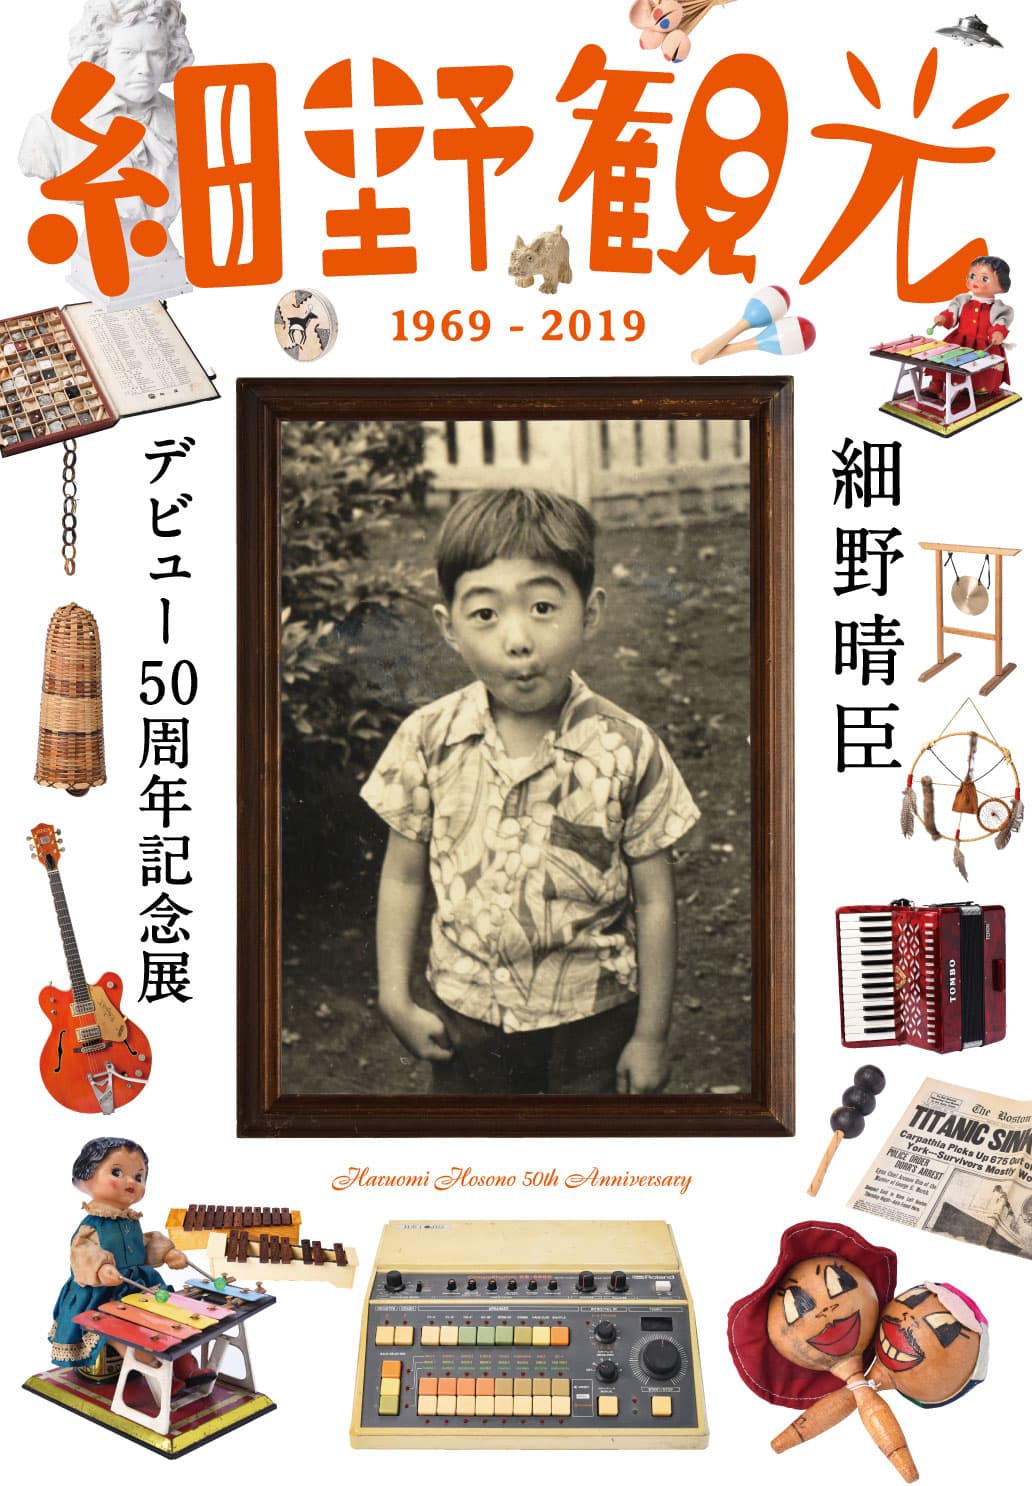 An exhibition over the history of Haruomi Hosono, held at Roppongi Hills Observatory